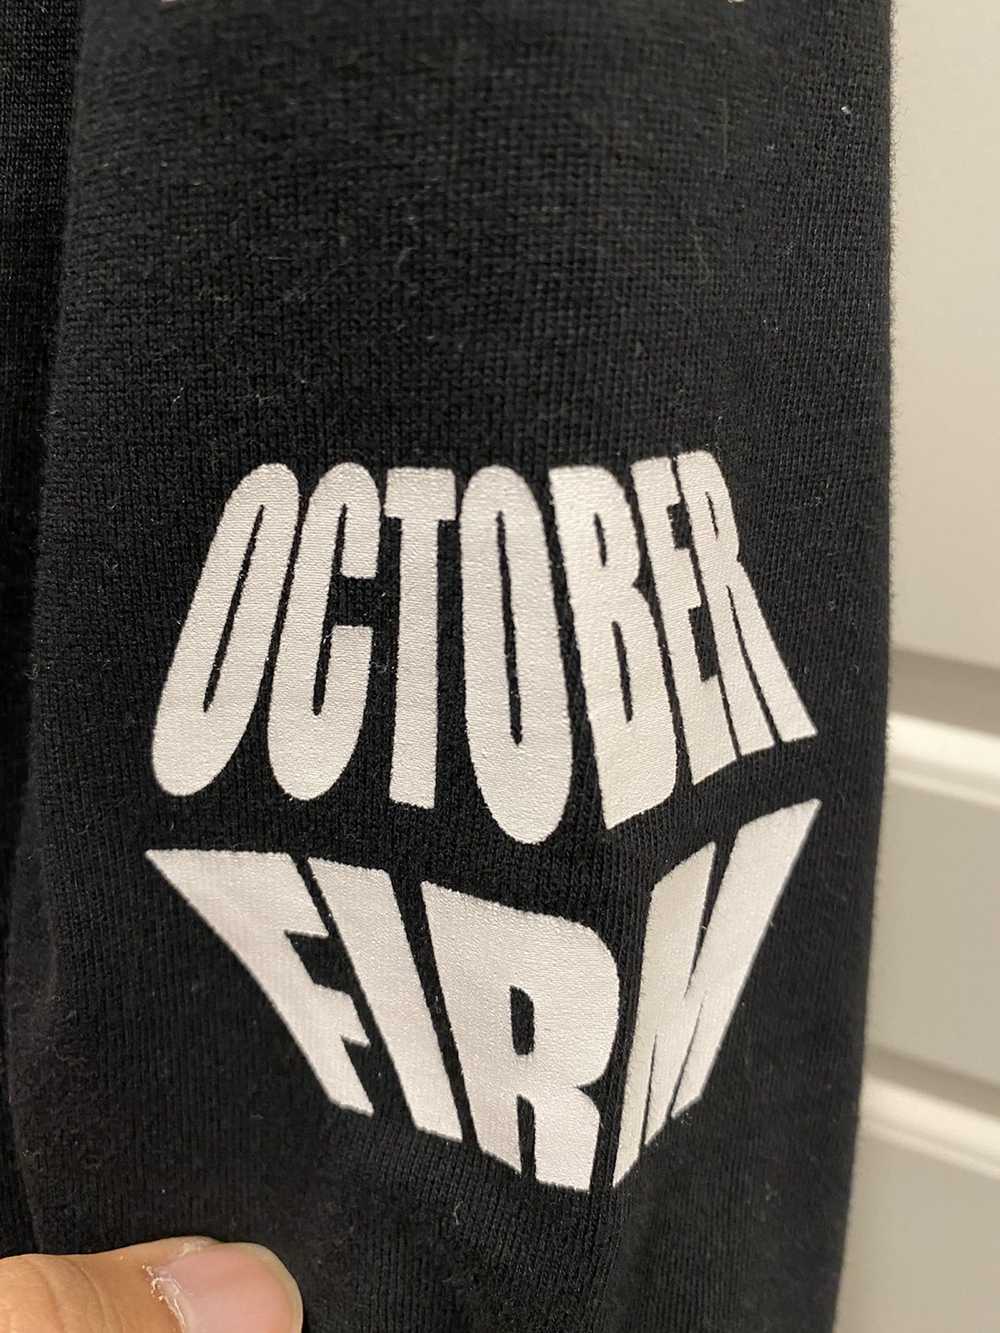 Octobers Very Own October Firm Long Sleeve T-Shir… - image 2